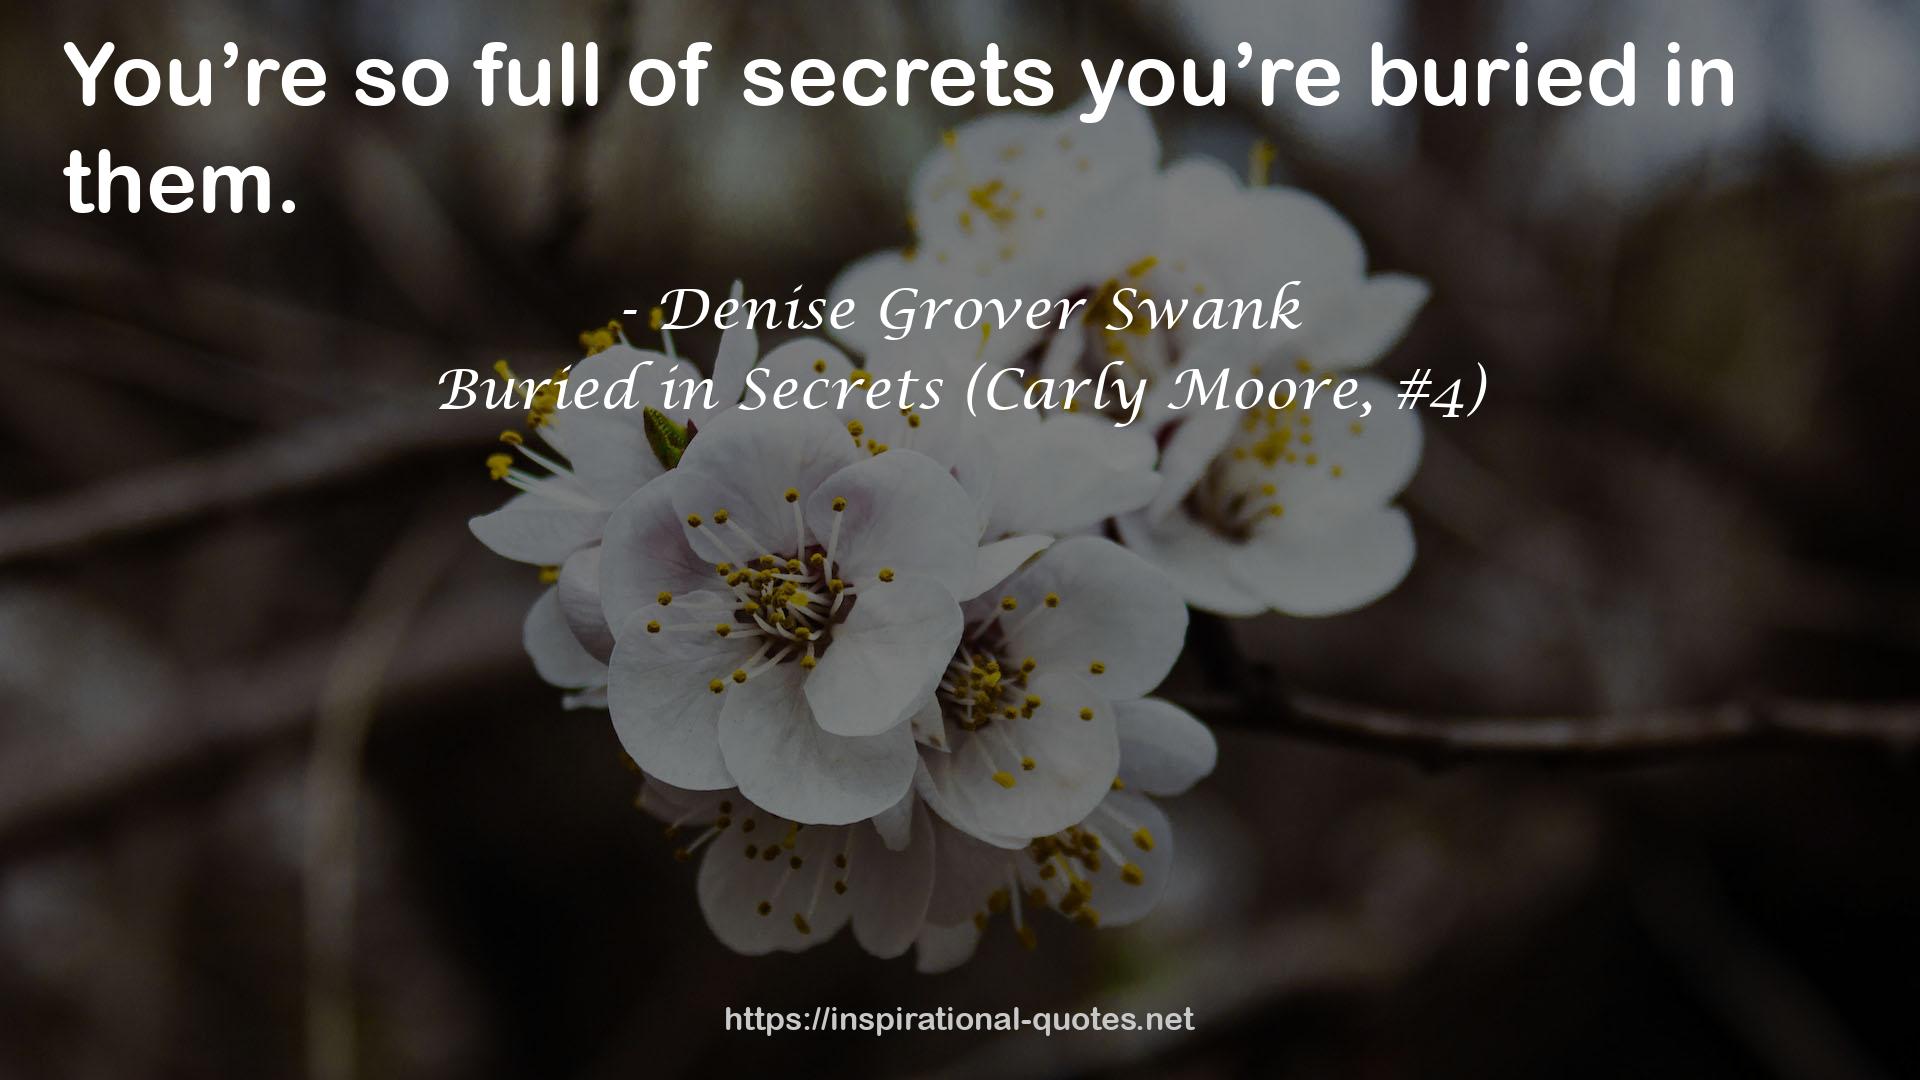 Buried in Secrets (Carly Moore, #4) QUOTES